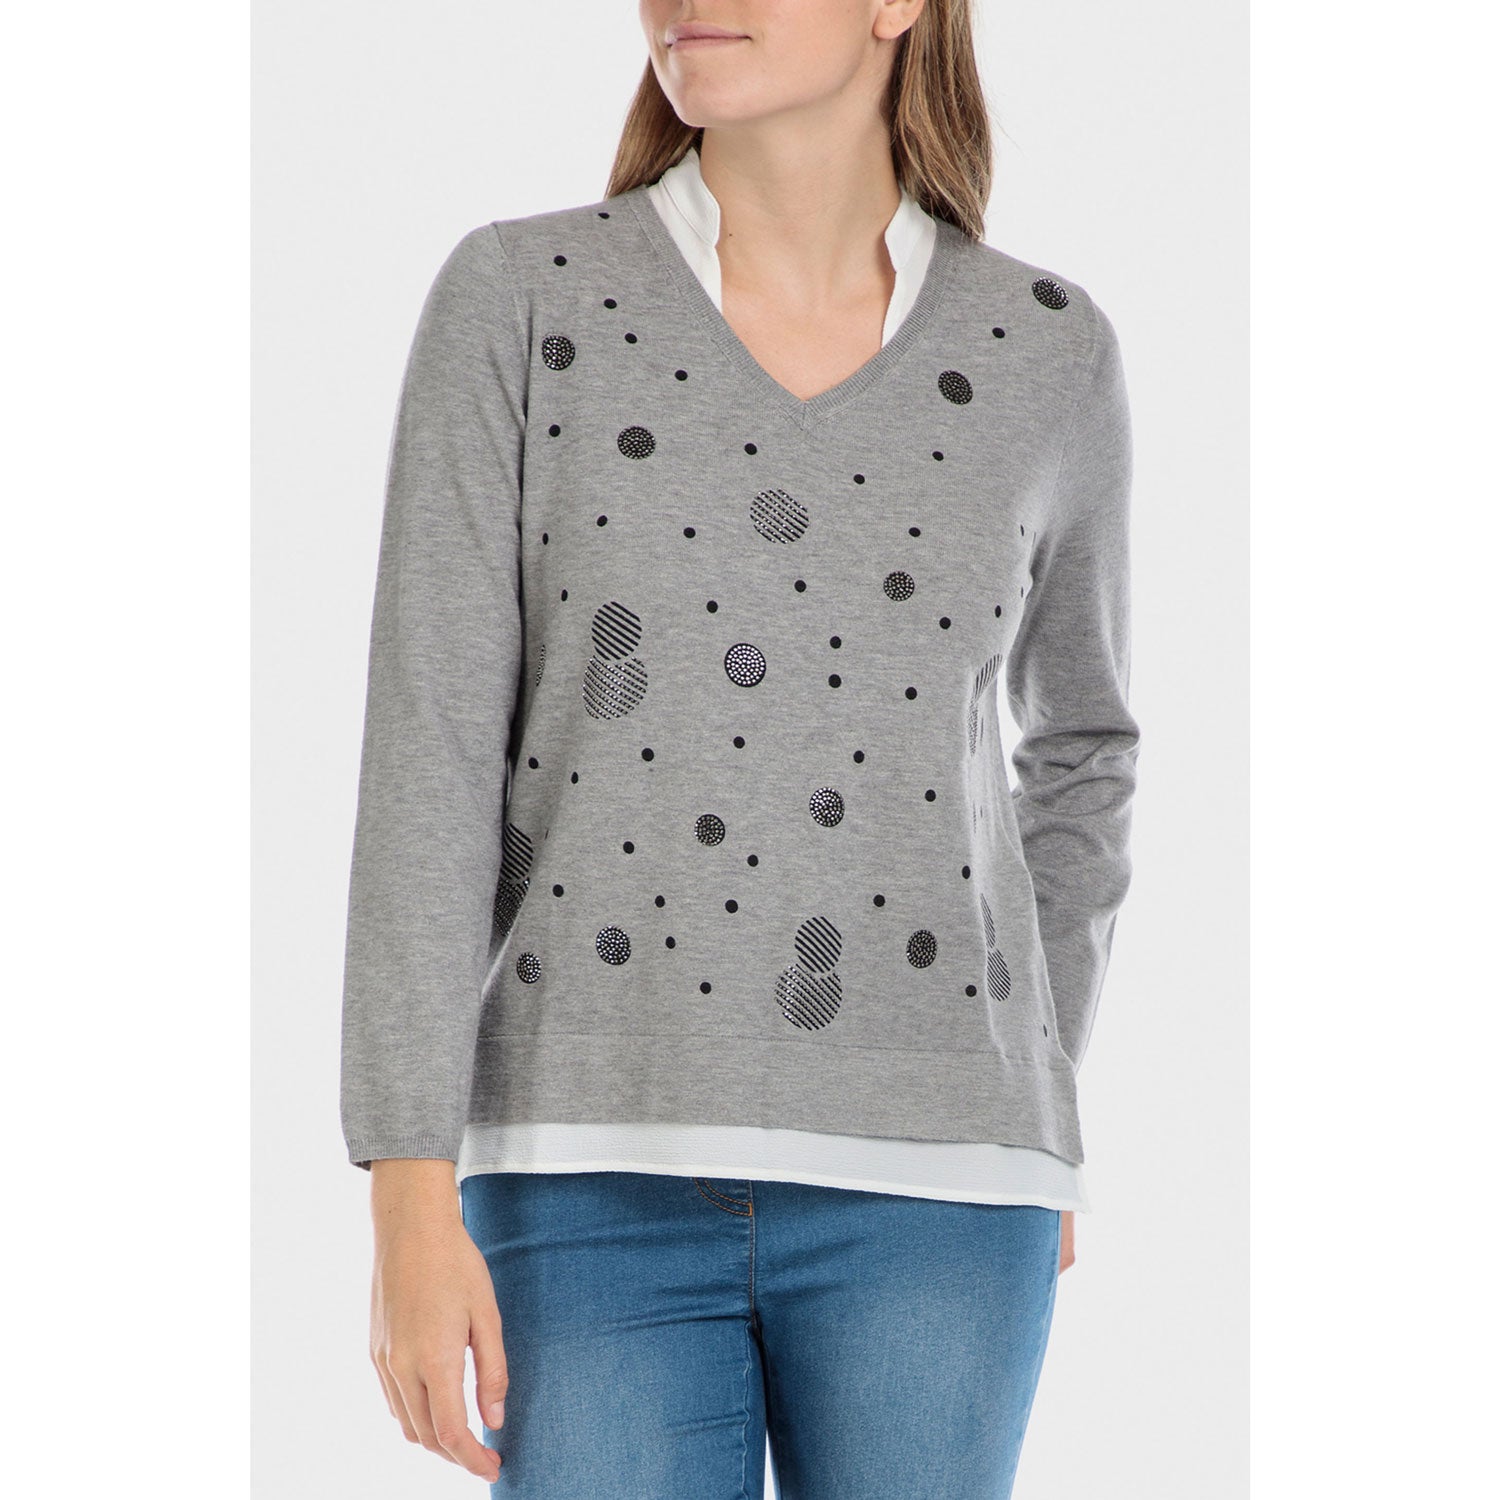 Punt Roma Sweater With Faux Shirt - Grey 1 Shaws Department Stores